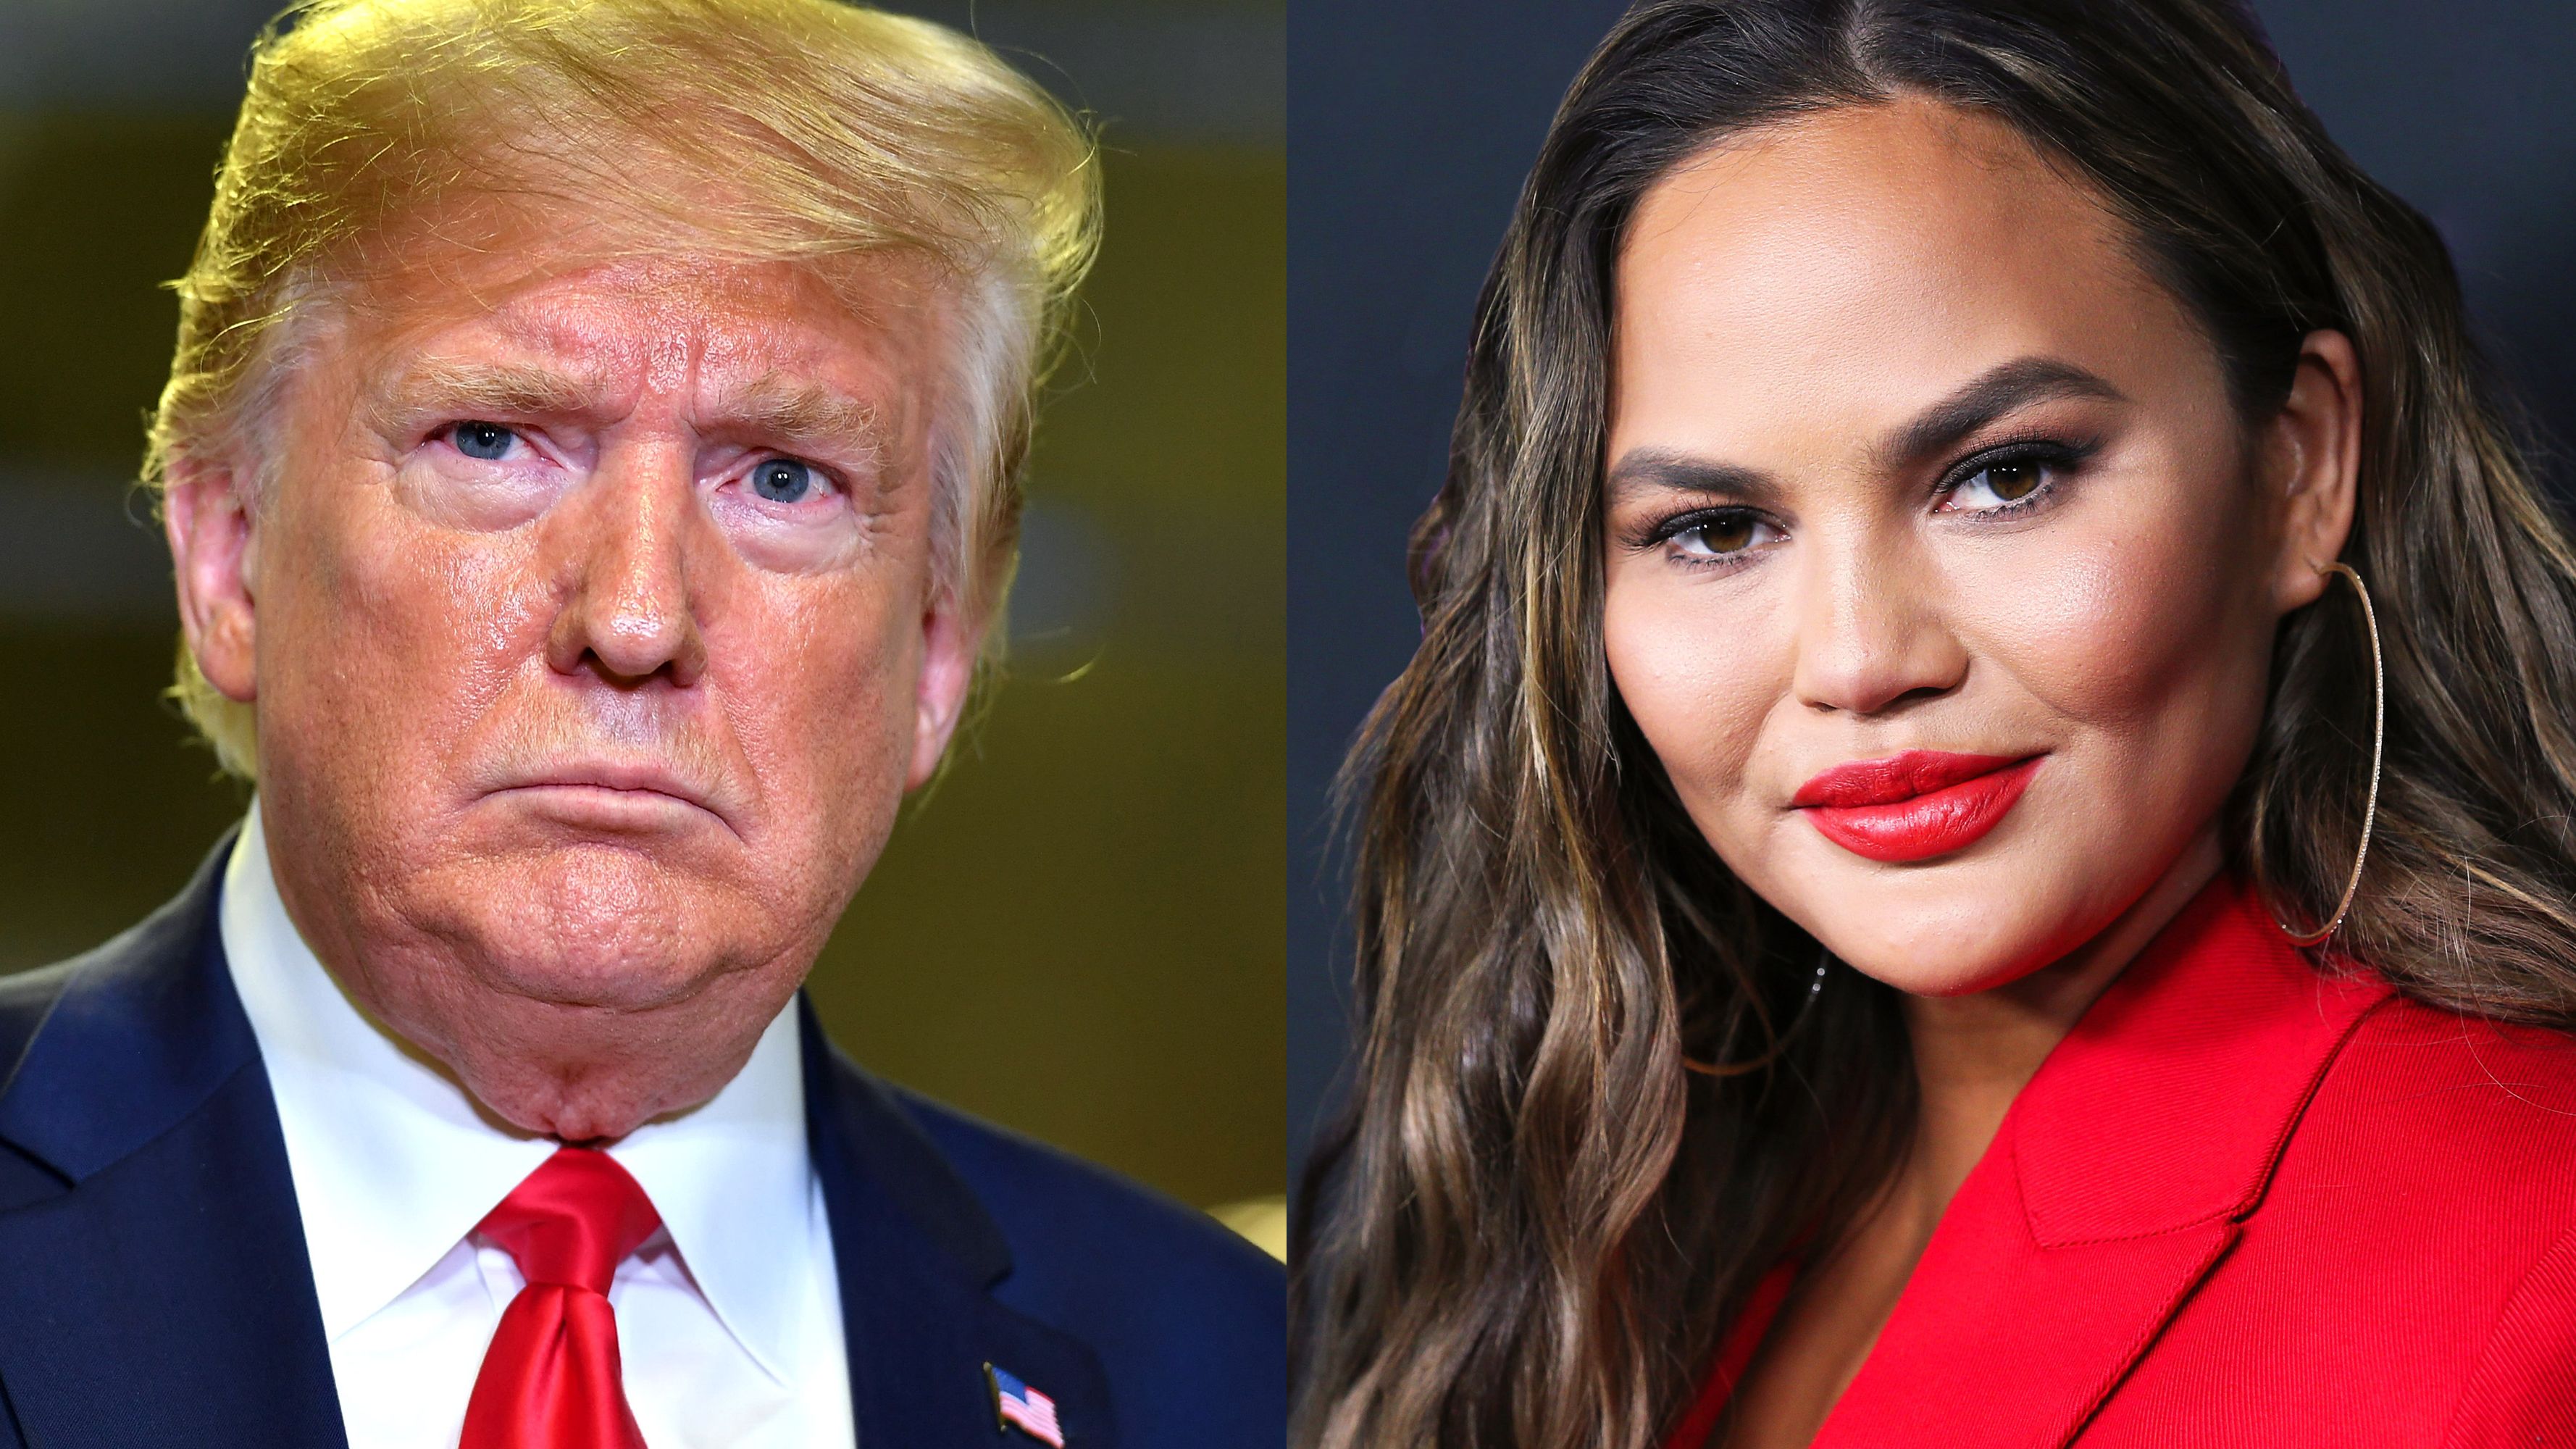 Chrissy Teigen Shares Melania Trump Impression On Twitter Marie Claire